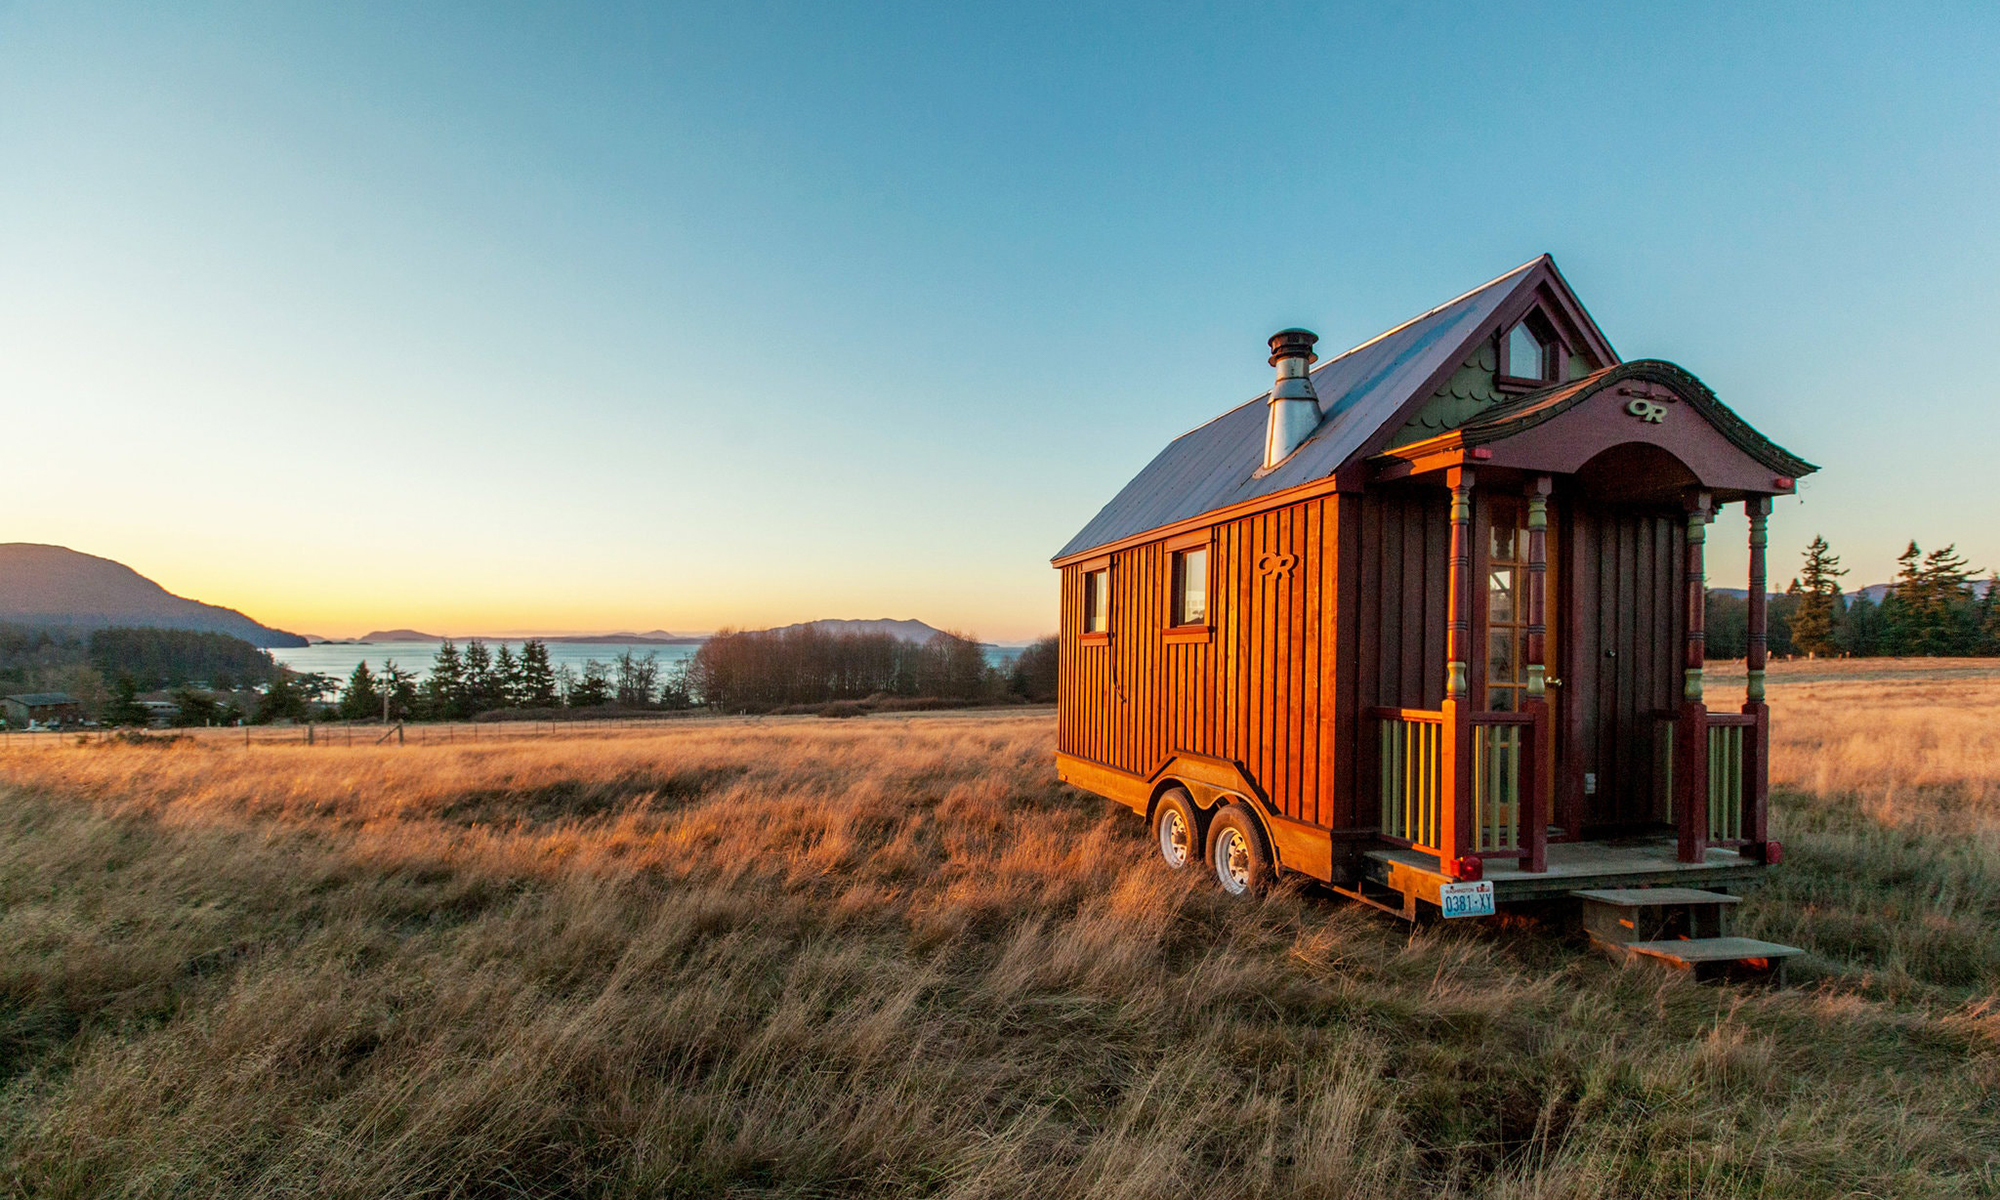 https://ideas.ted.com/wp-content/uploads/sites/3/2021/09/FEATURED_tiny-home-exterior3.jpg